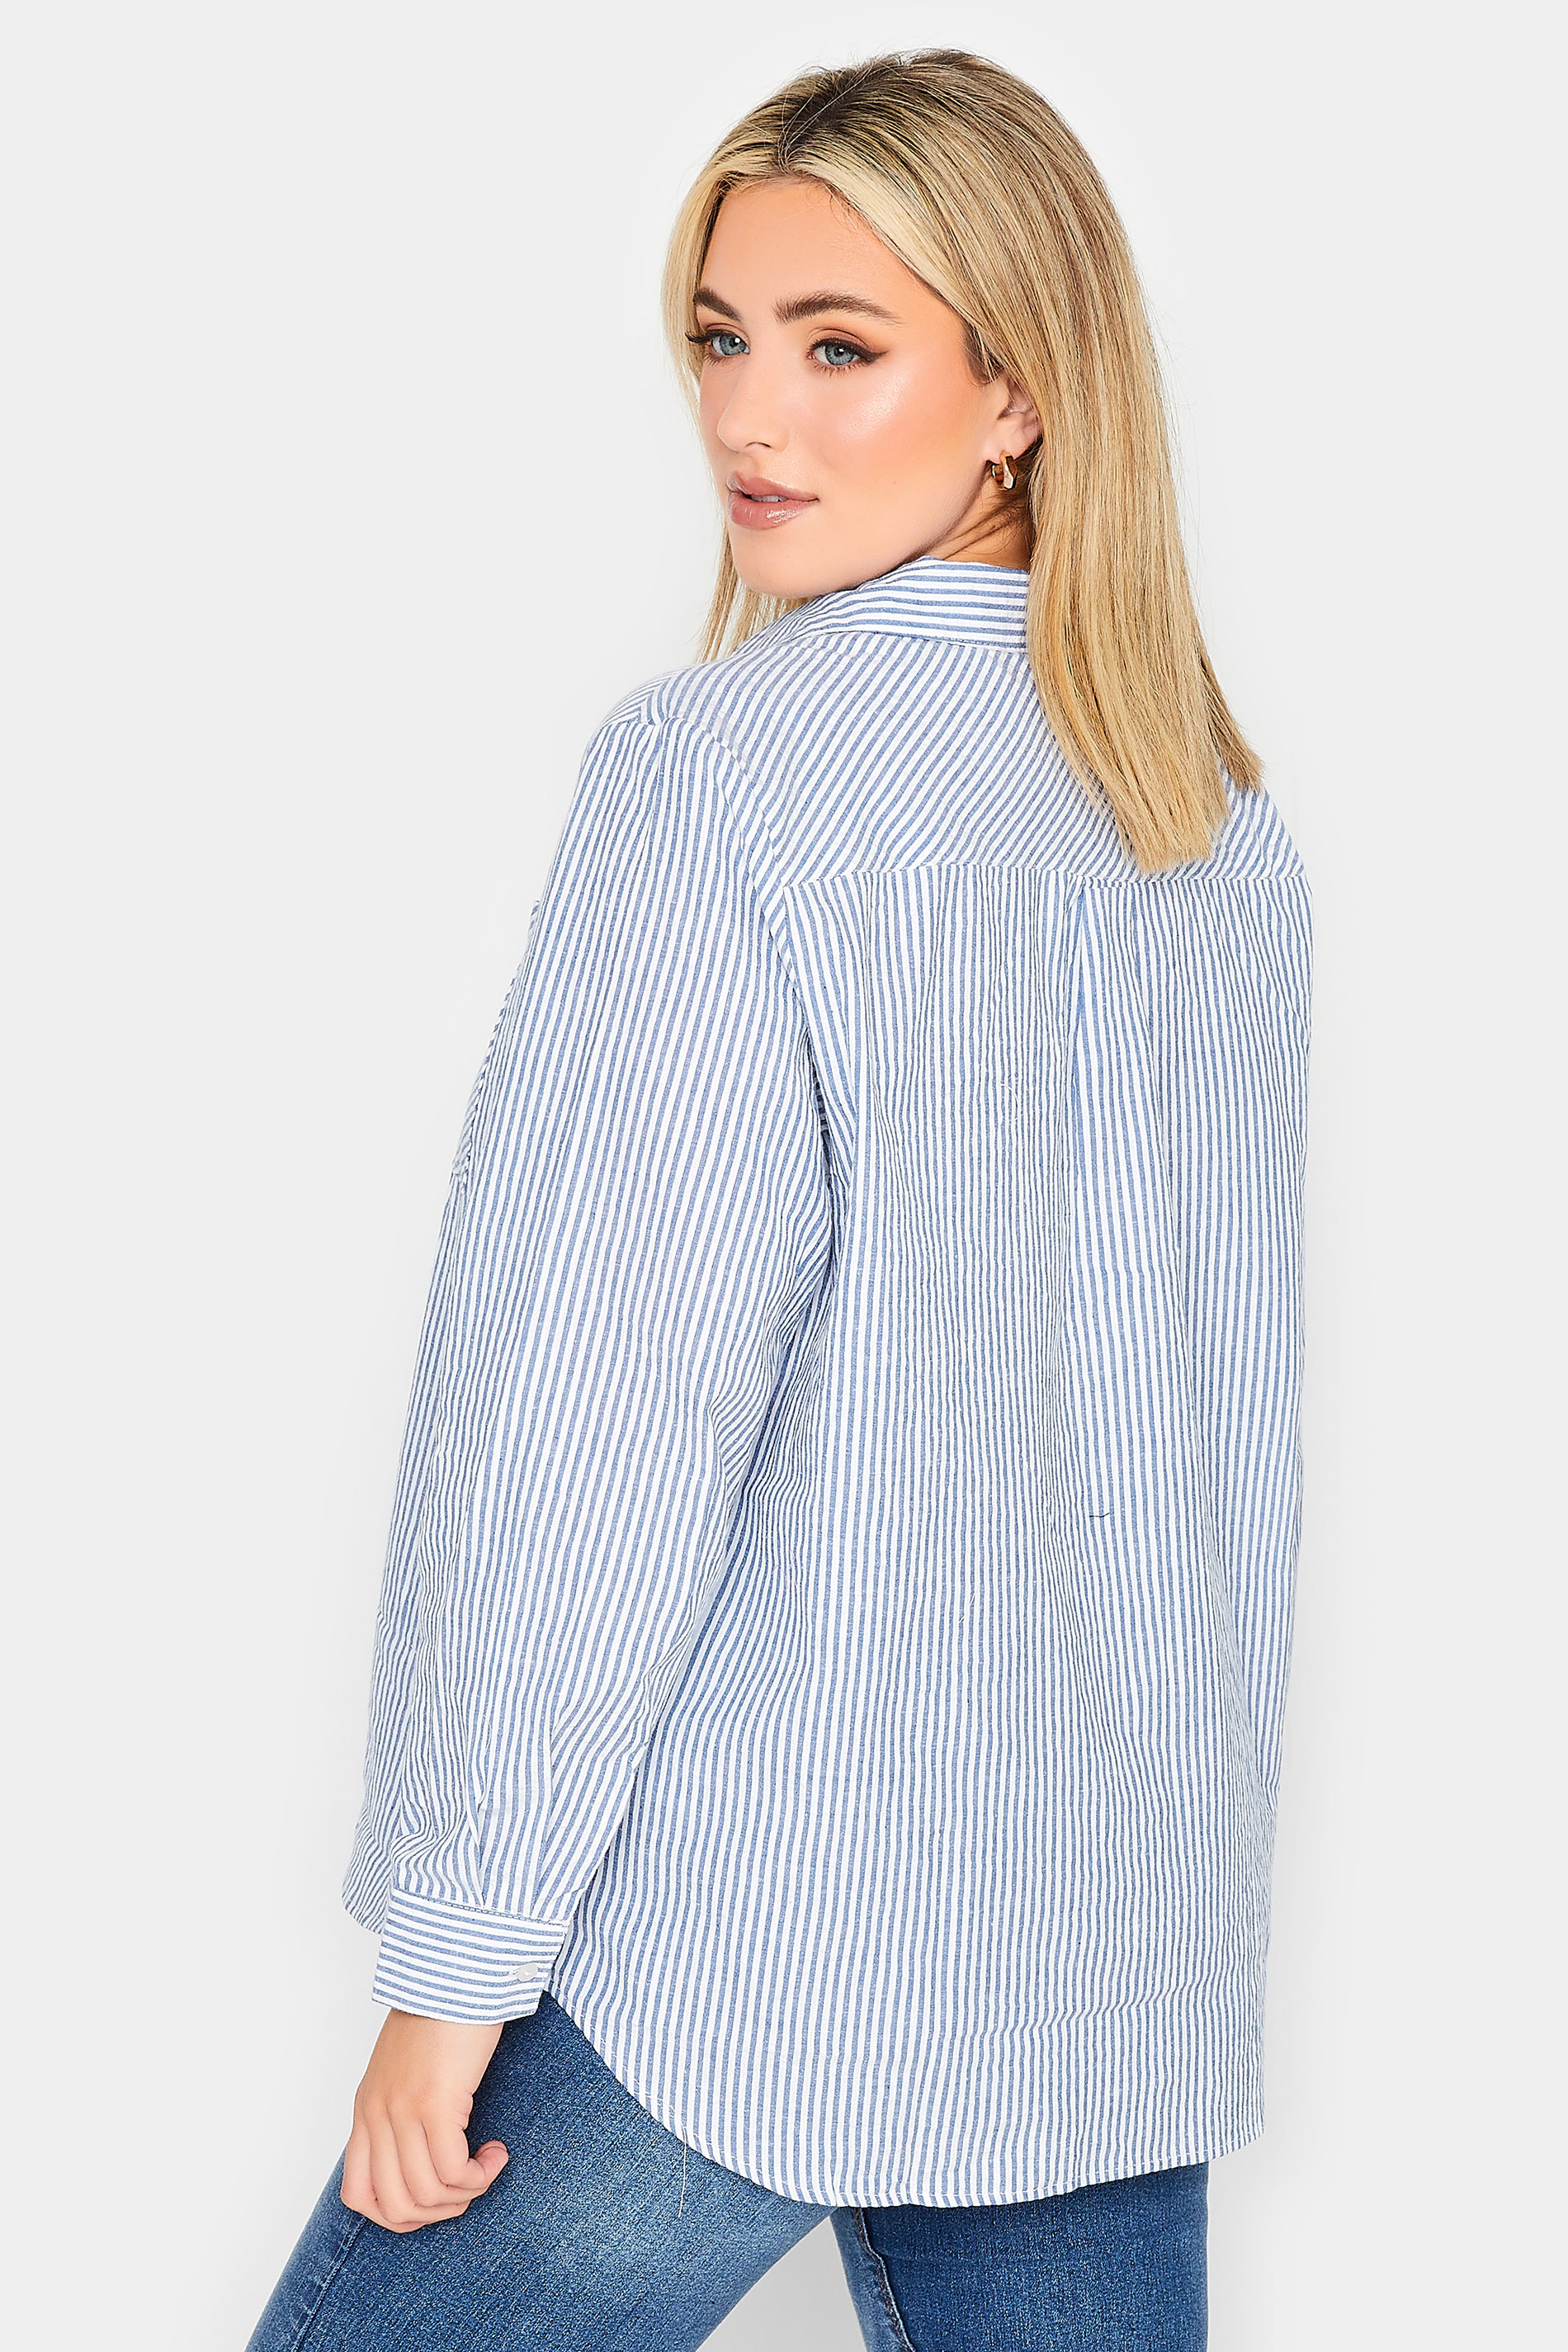 YOURS PETITE Plus Size Blue Stripe Shirt | Yours Clothing 3